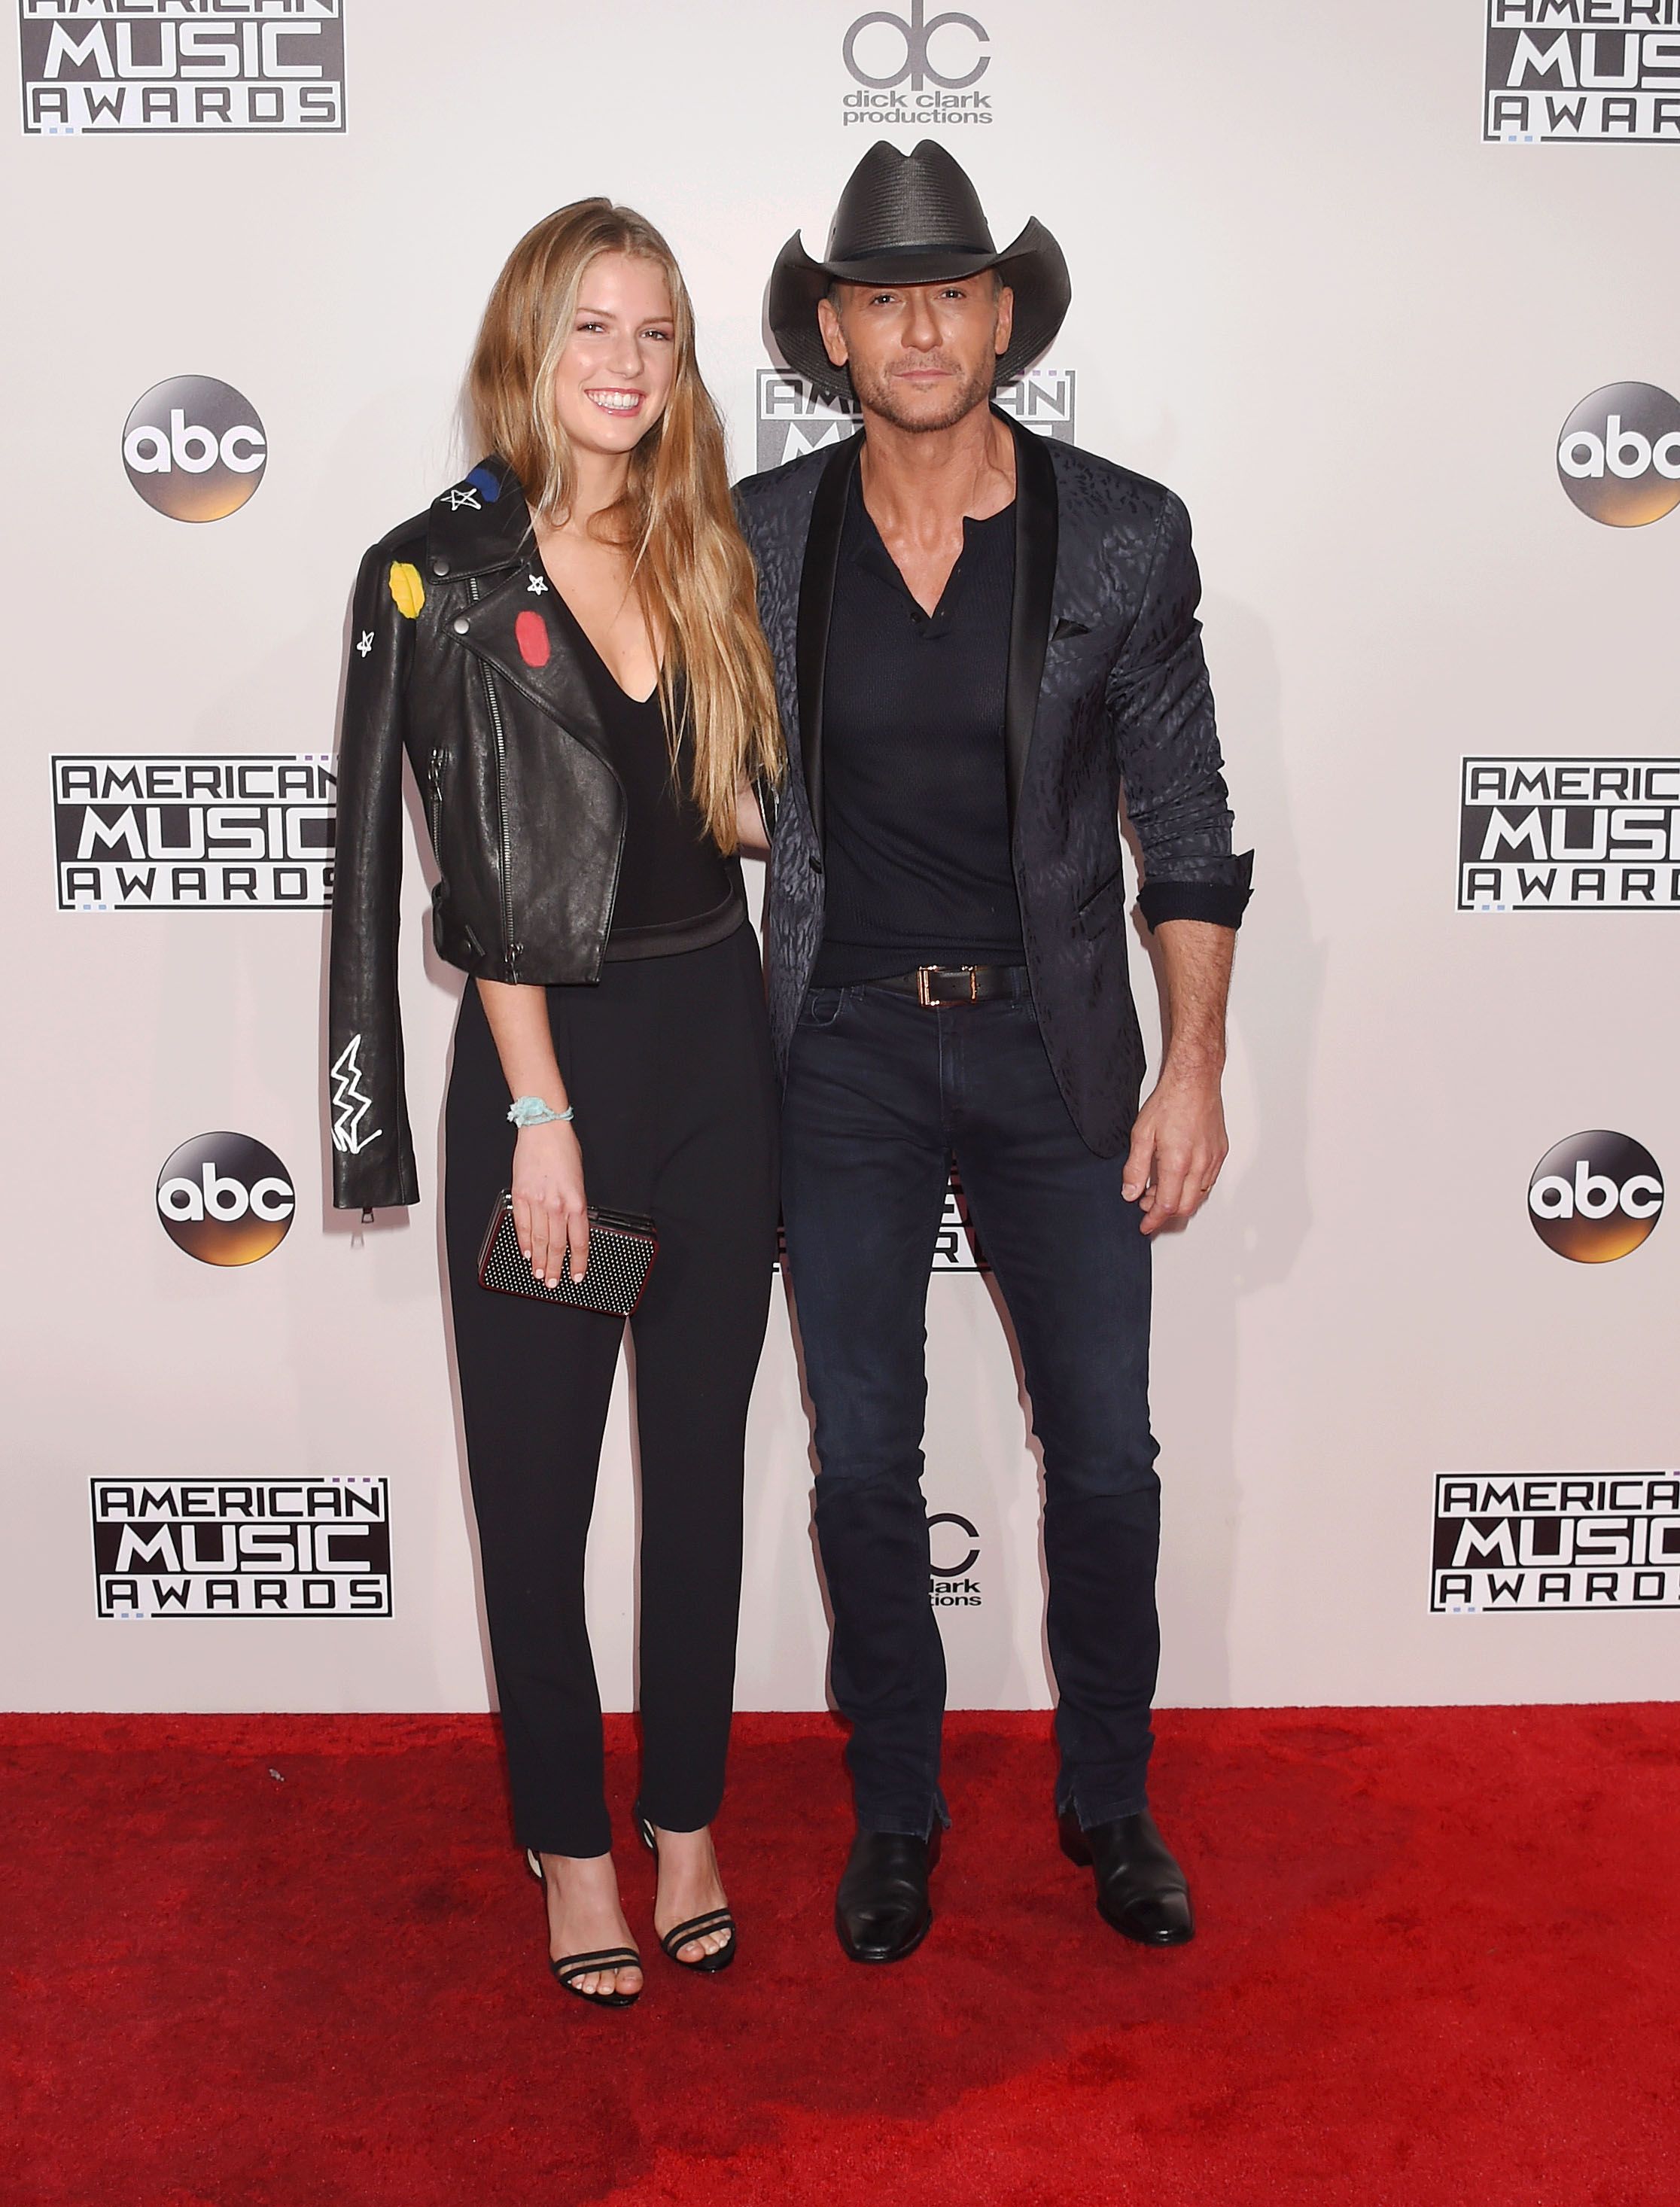 Maggie Elizabeth McGraw and Tim McGraw at the 2016 American Music Awards at Microsoft Theater on November 20, 2016 | Photo: Getty Images